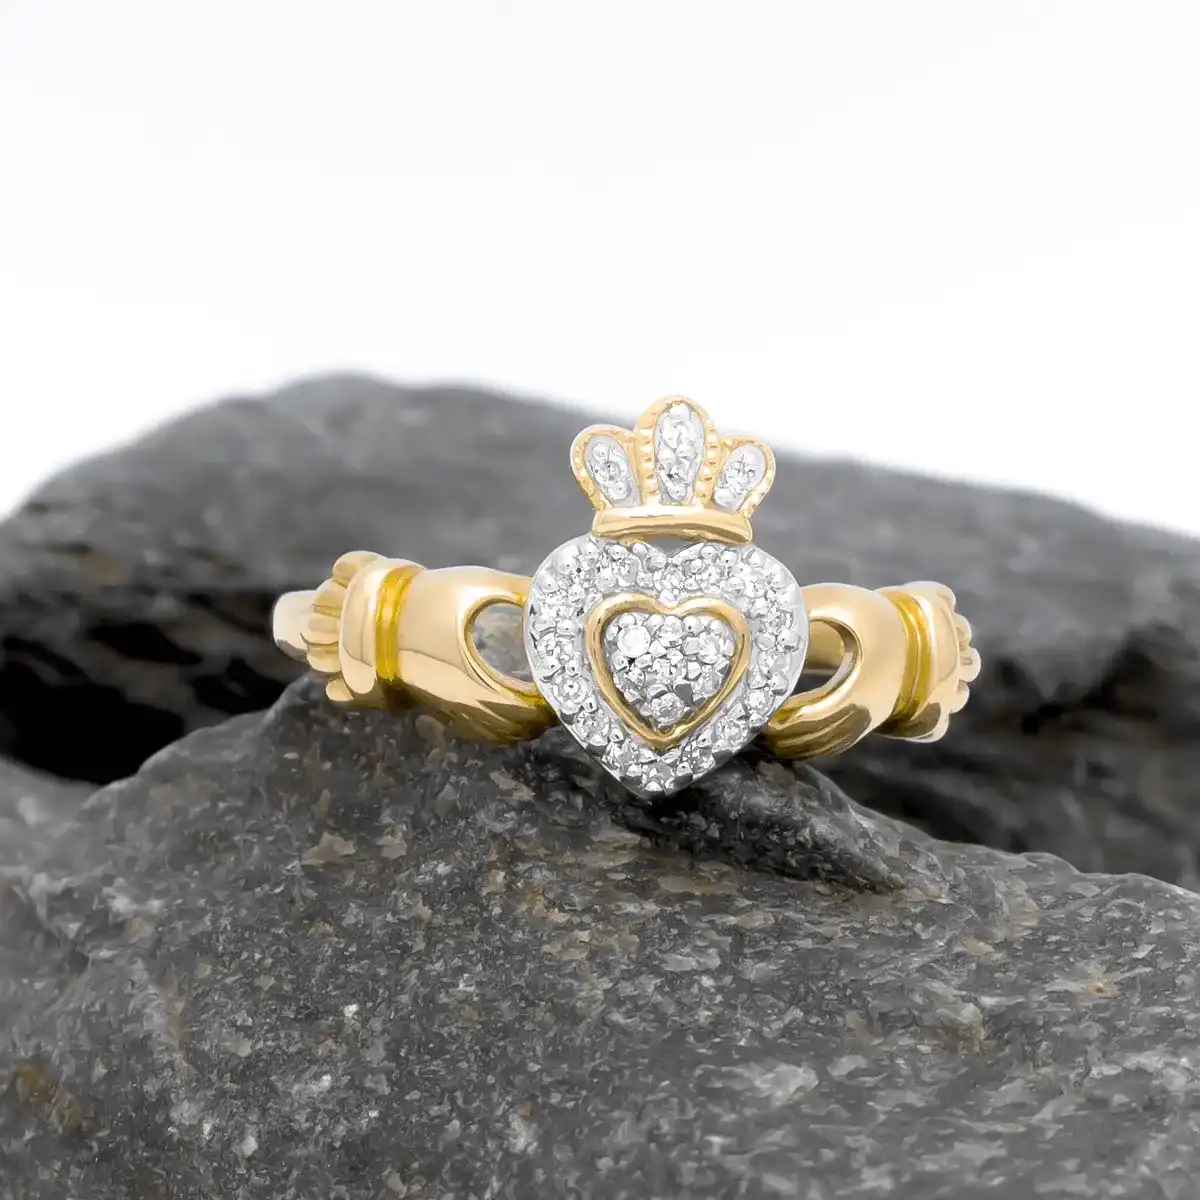 Exquisite Yellow Gold And Diamond Claddagh Ring 